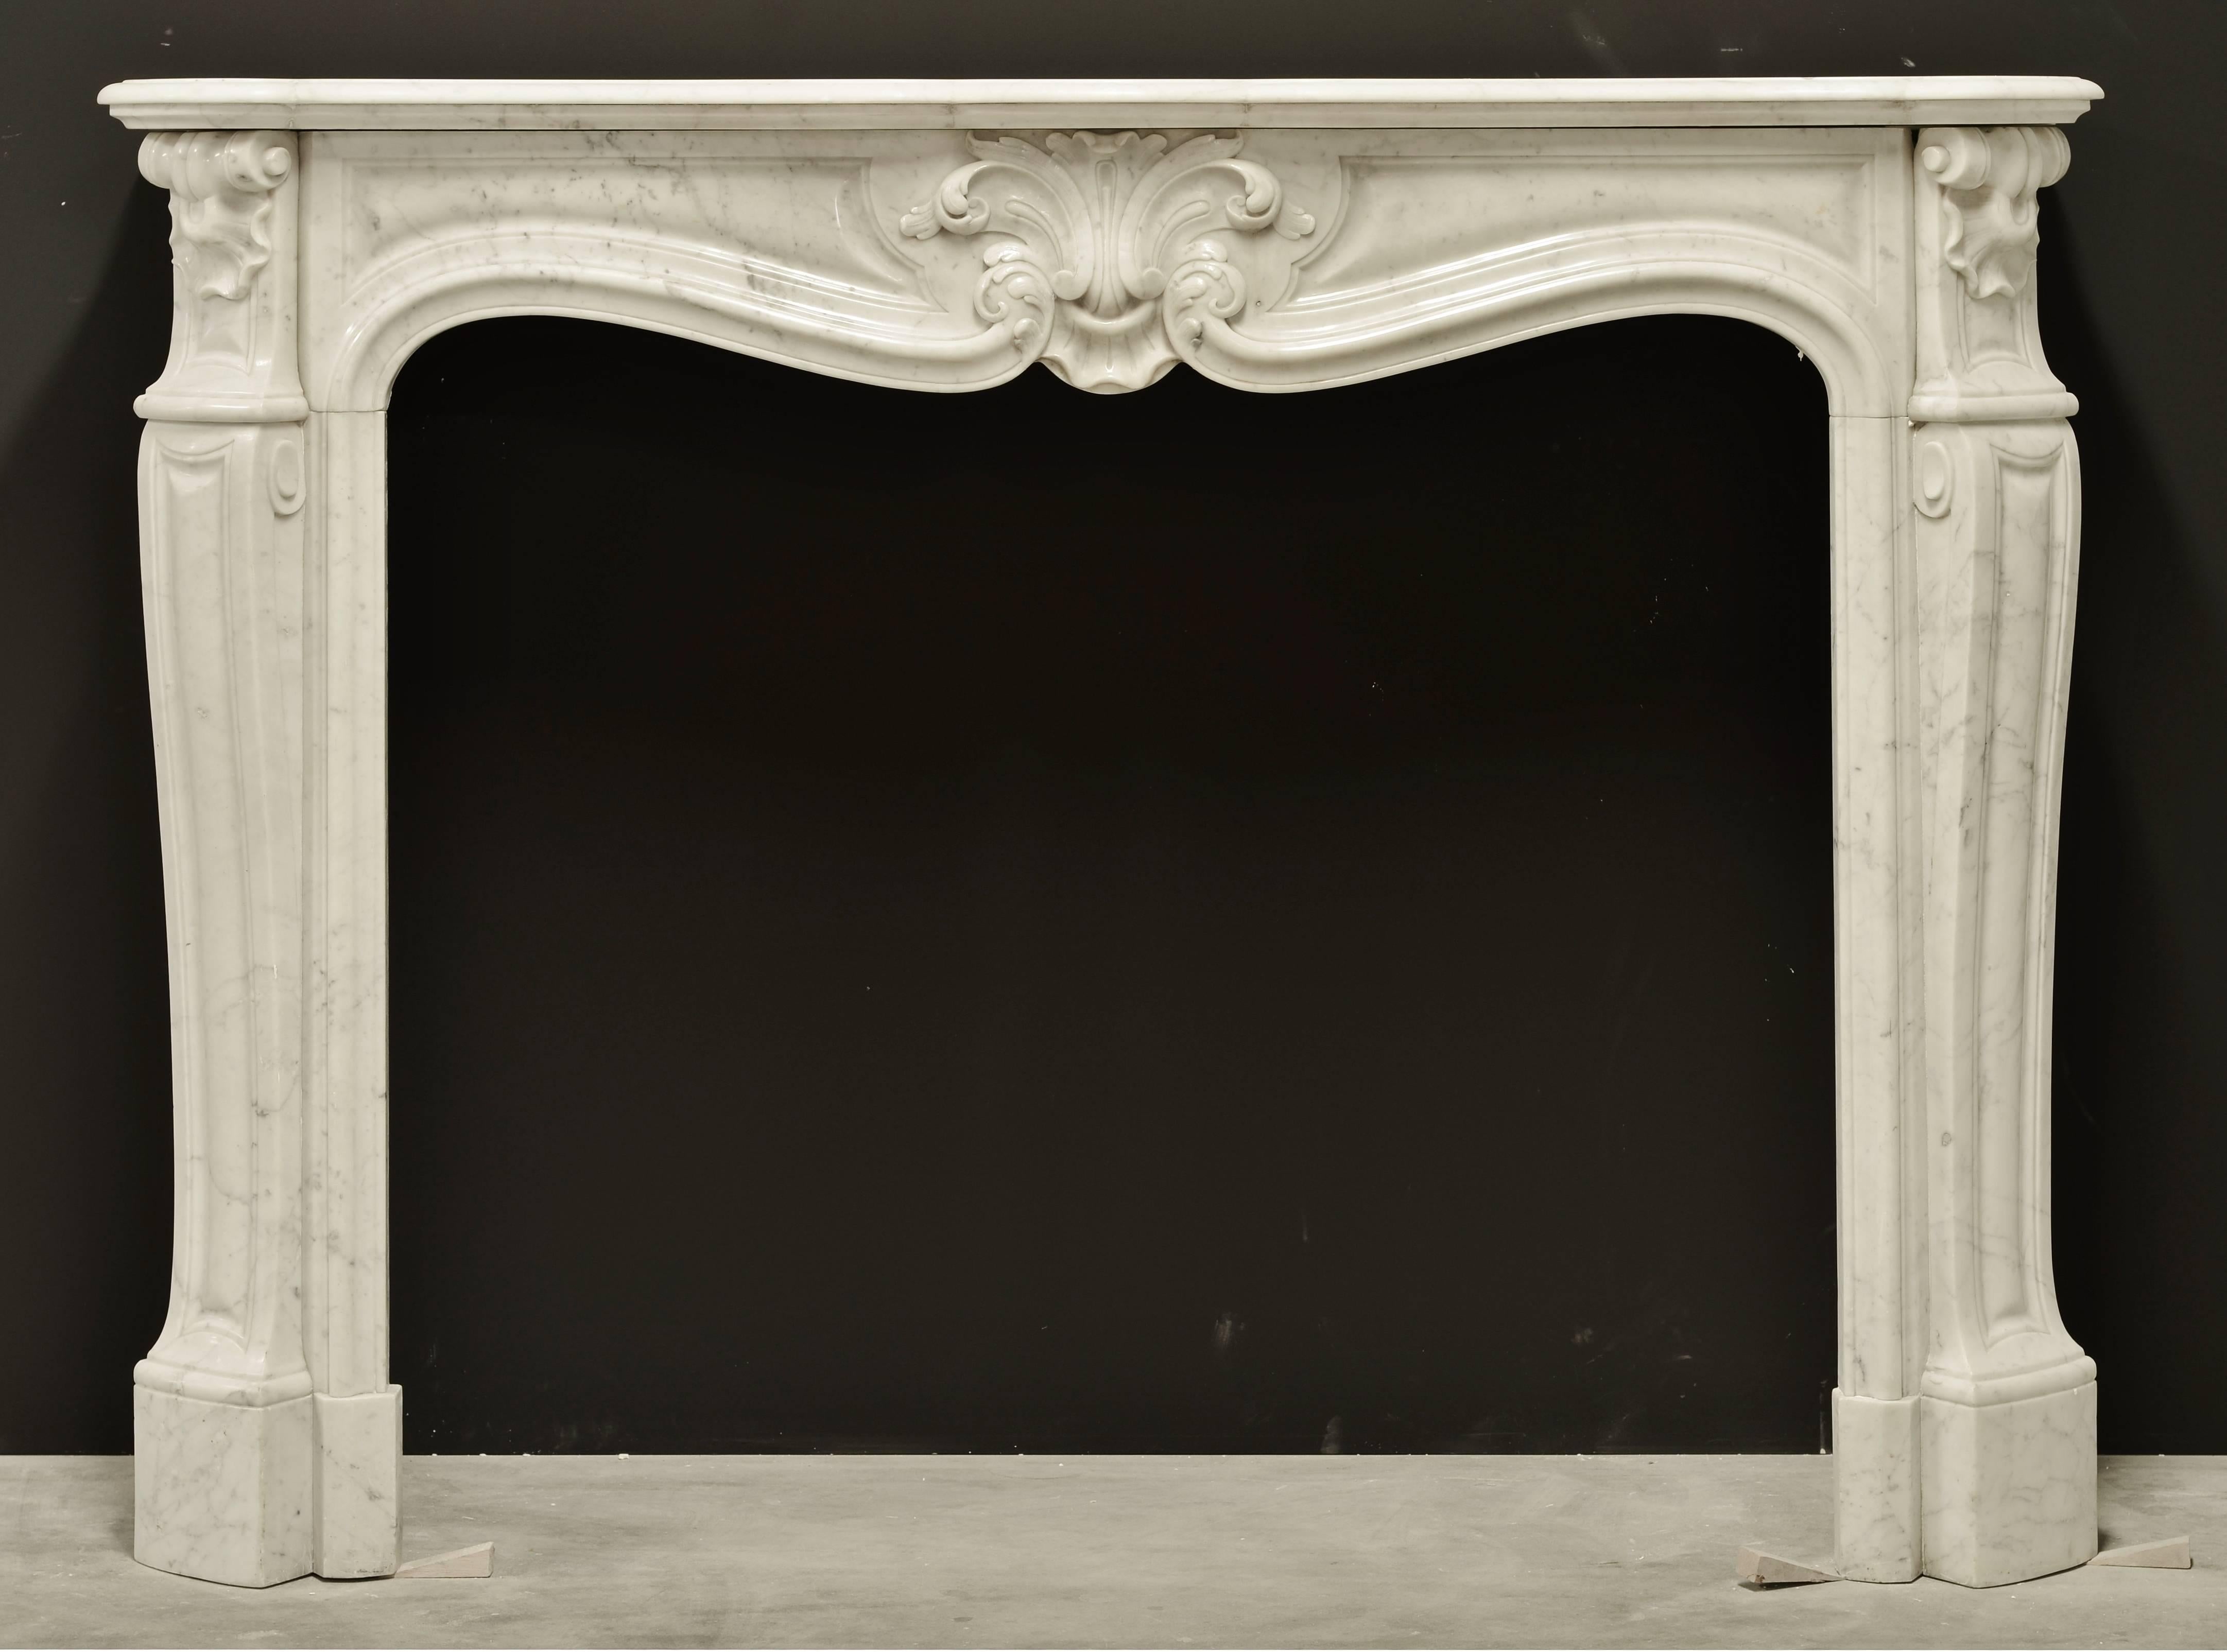 Beautiful decorative Parisian Louis XV fireplace mantel in Carrara white marble, 19th century, France.

Left side panels show minor yellowing. Overall excellent original condition.
Ready to be shipped and installed.


We can supply the correct